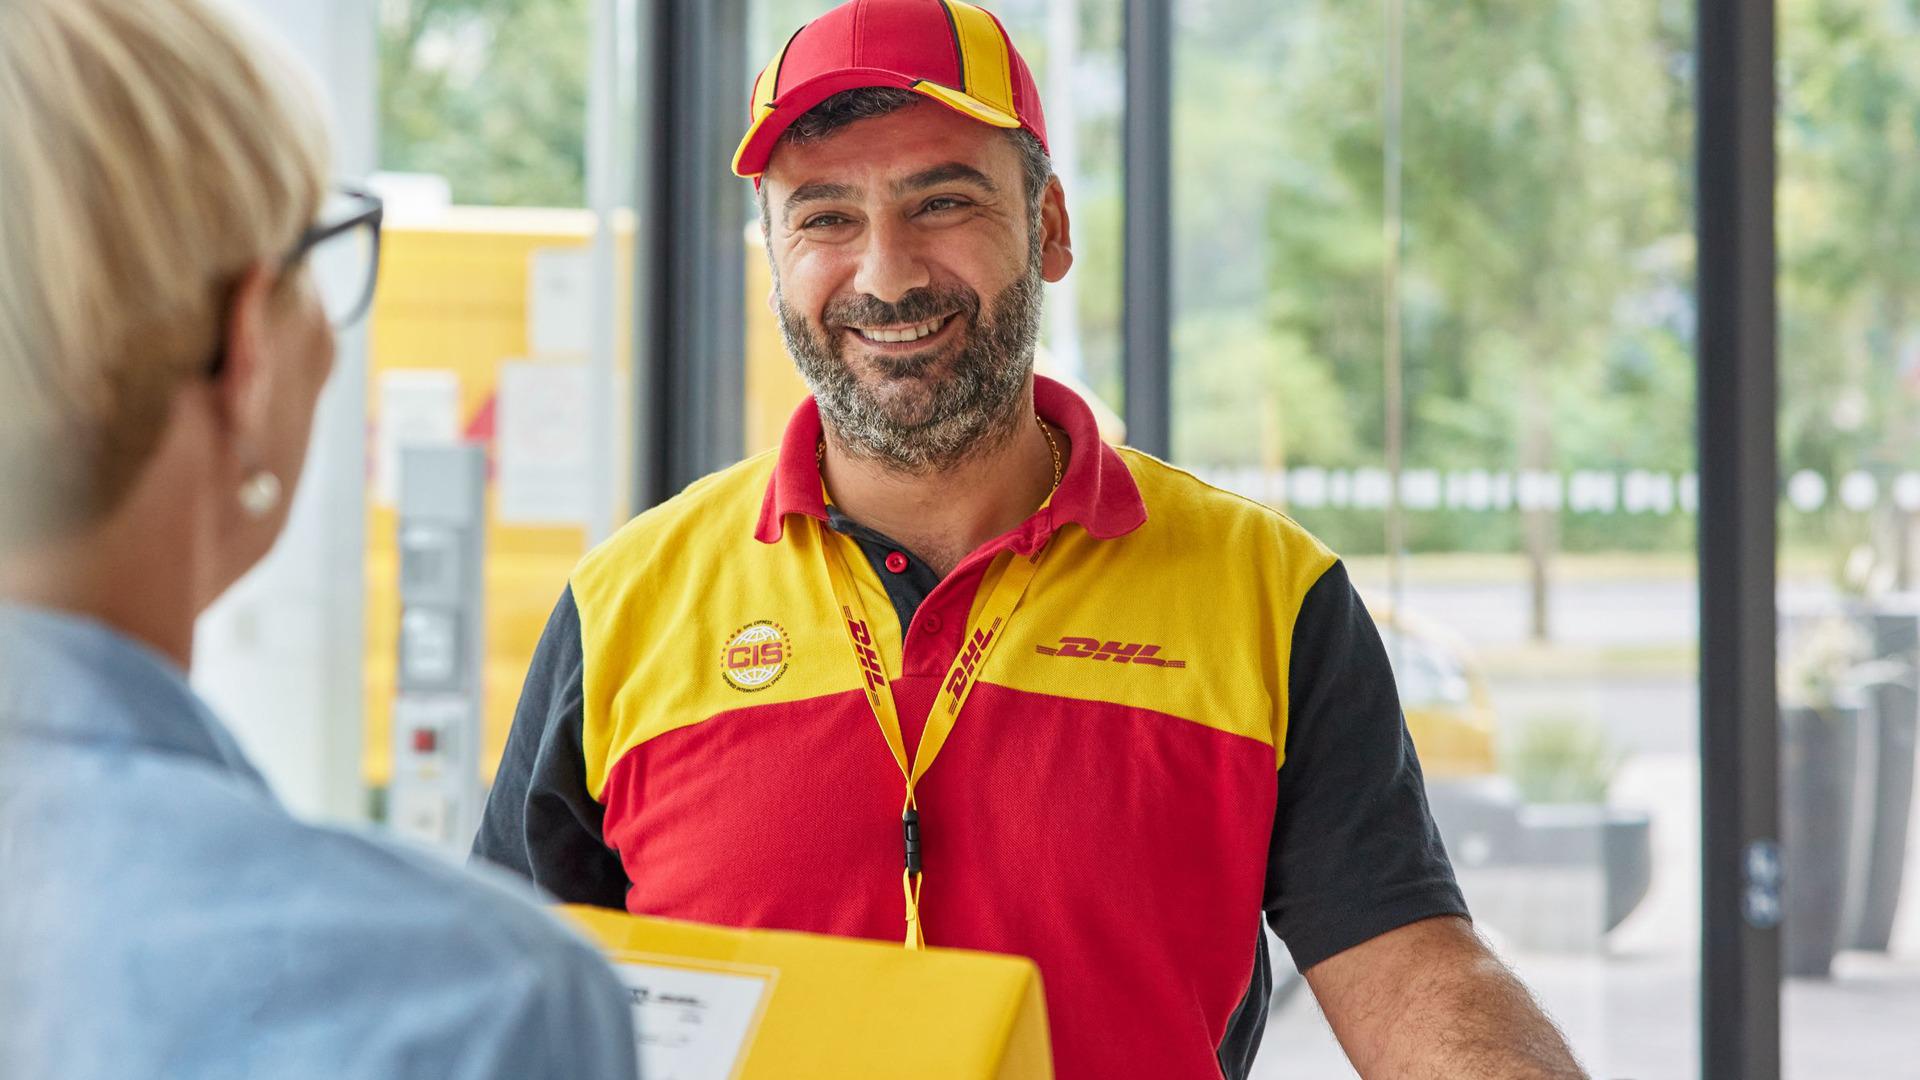 DHL Express Service Point (Robert Dyas Guildford)